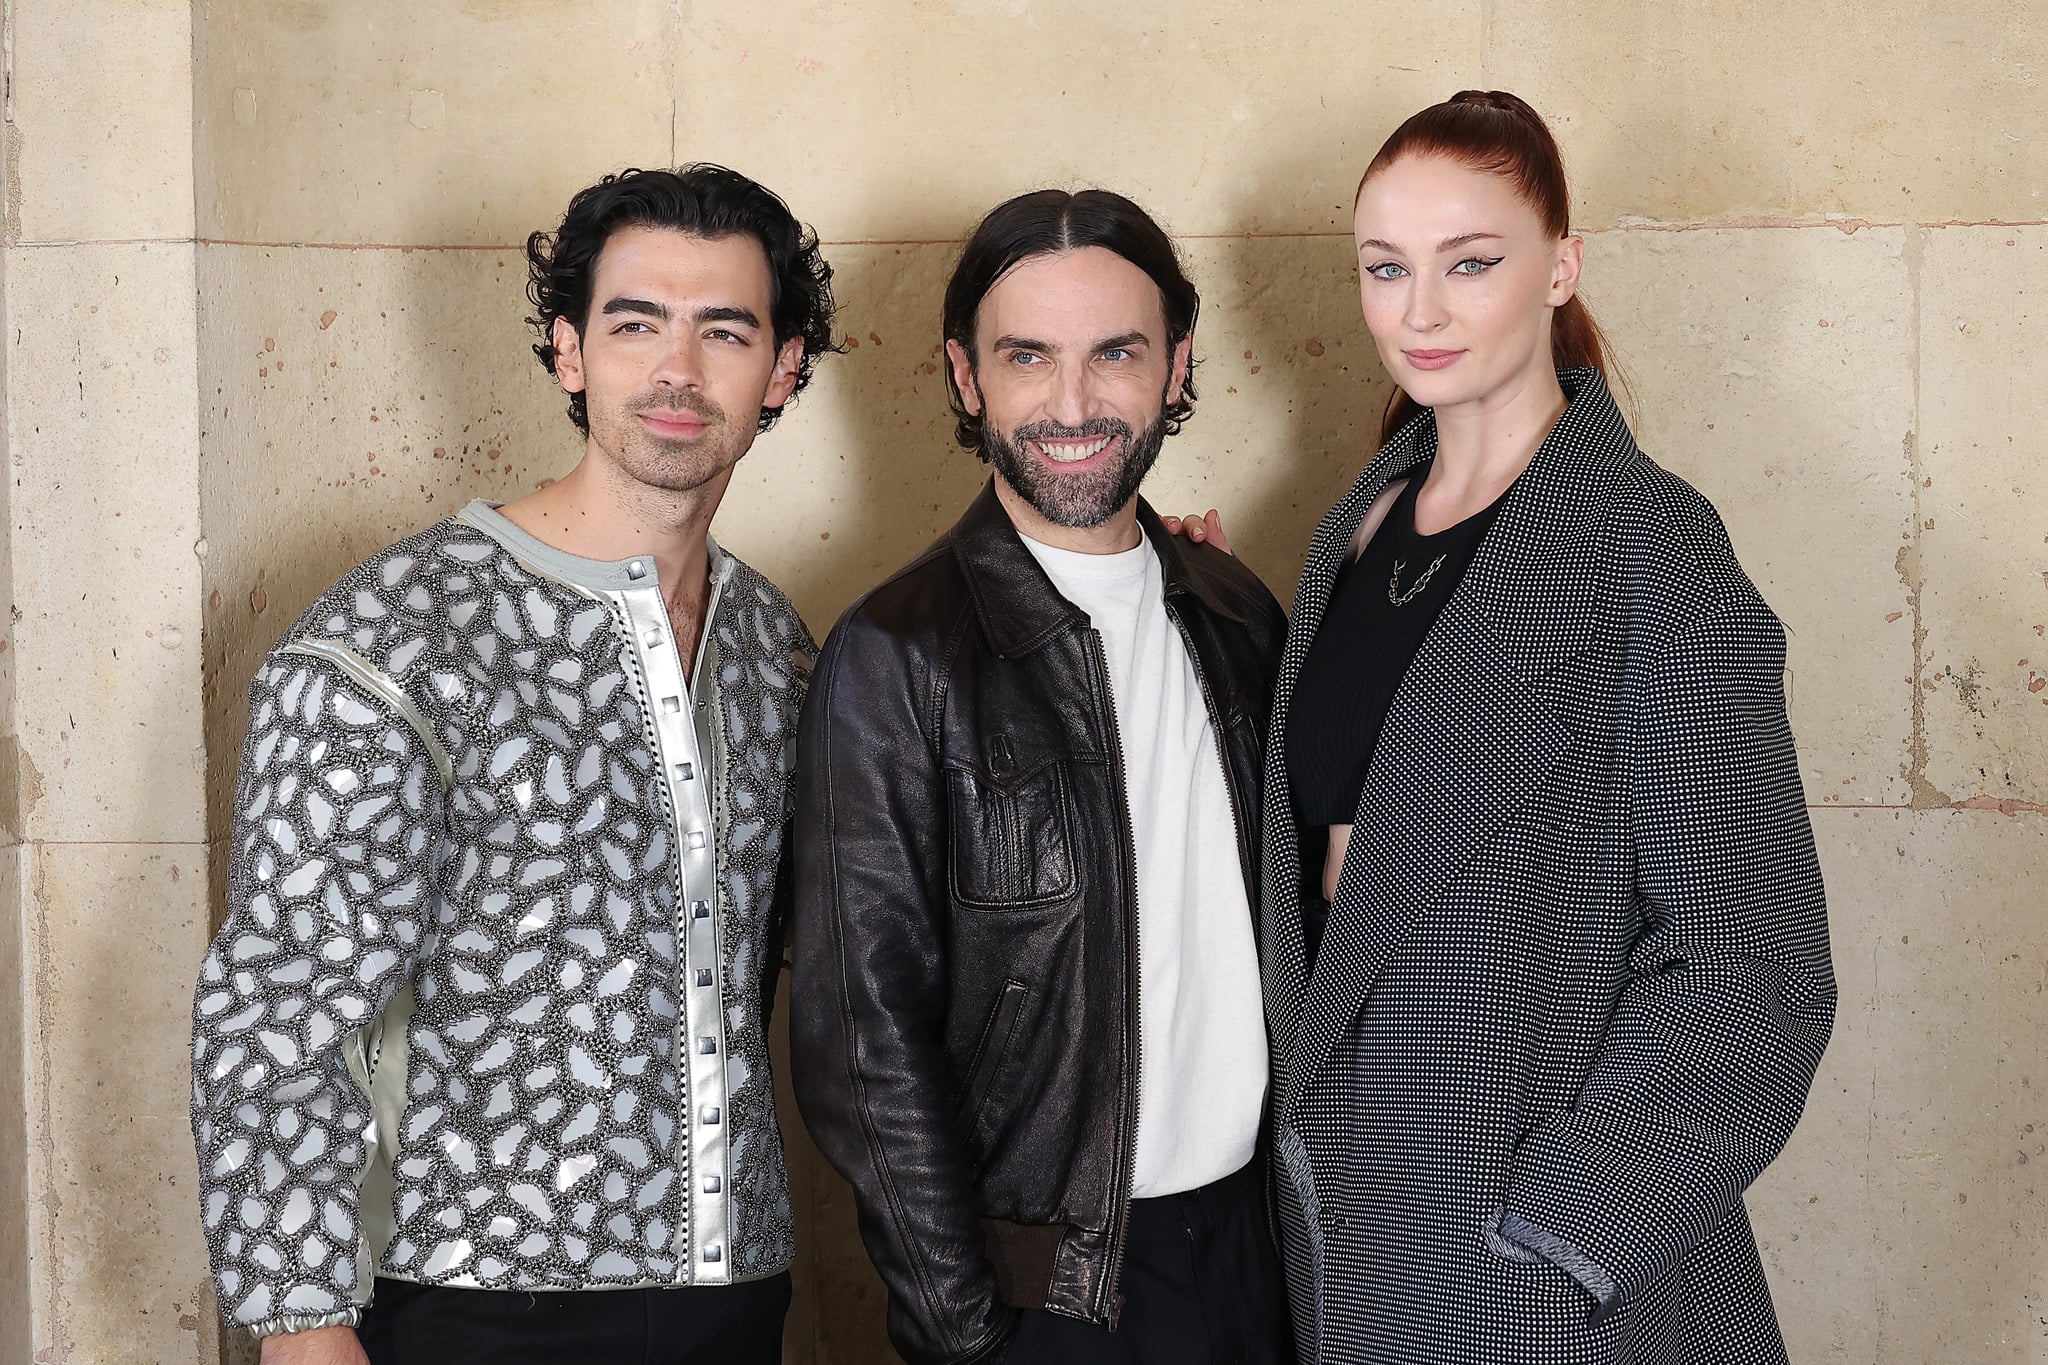 PARIS, FRANCE - OCTOBER 04: (EDITORIAL USE ONLY - For Non-Editorial use please seek approval from Fashion House) Joe Jonas, Nicolas Ghesquière and Sophie Turner pose backstage prior to the Louis Vuitton Womenswear Spring/Summer 2023 show as part of Paris Fashion Week on October 04, 2022 in Paris, France. (Photo by Marc Piasecki/WireImage)